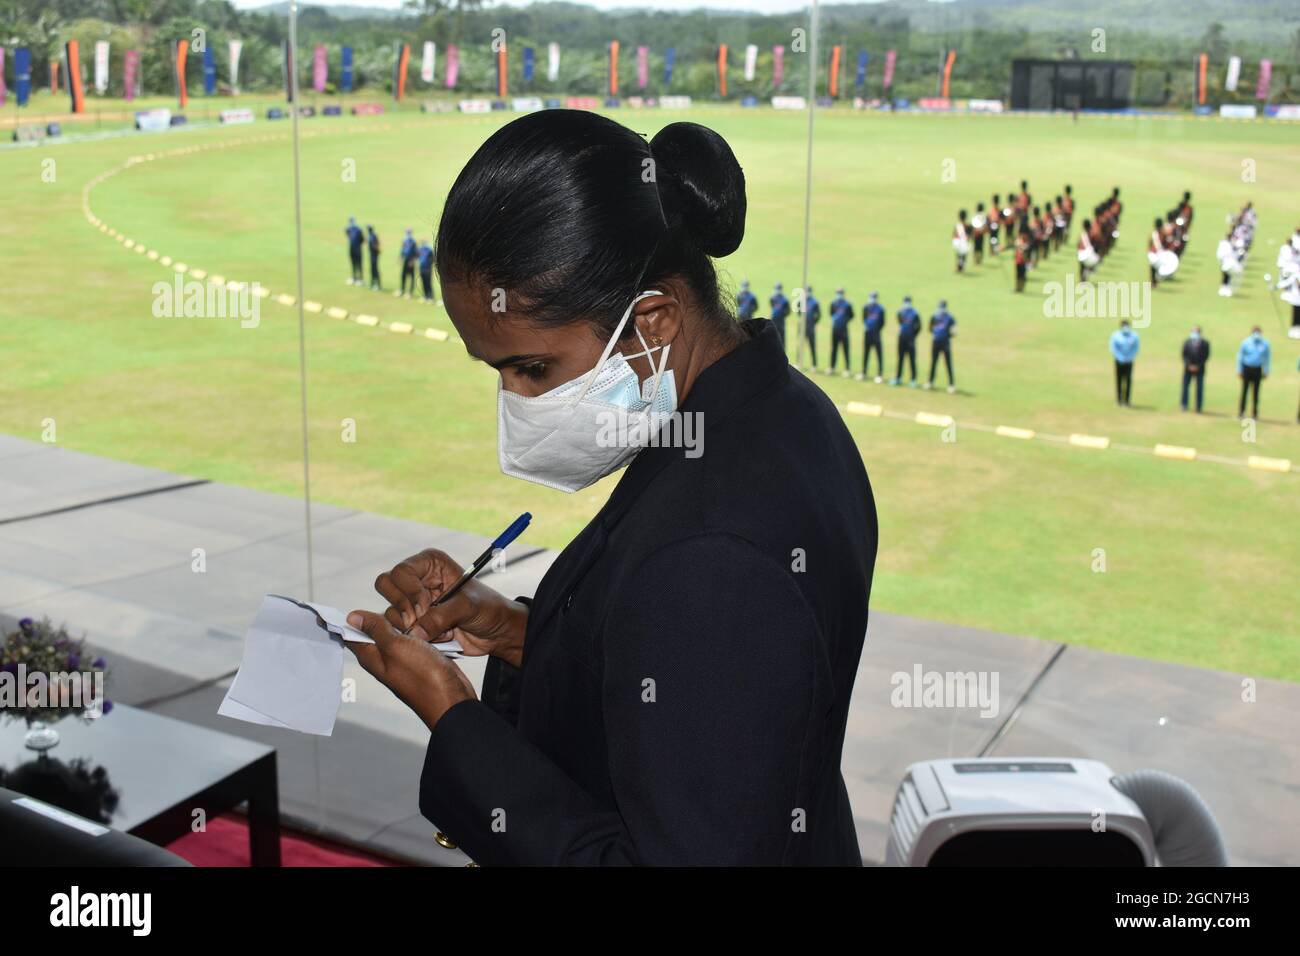 Sri Lanka Army personal taking down notes before a opening ceremony of a sports event. Army Ordinance cricket grounds. Dombagoda. Sri Lanka. Stock Photo